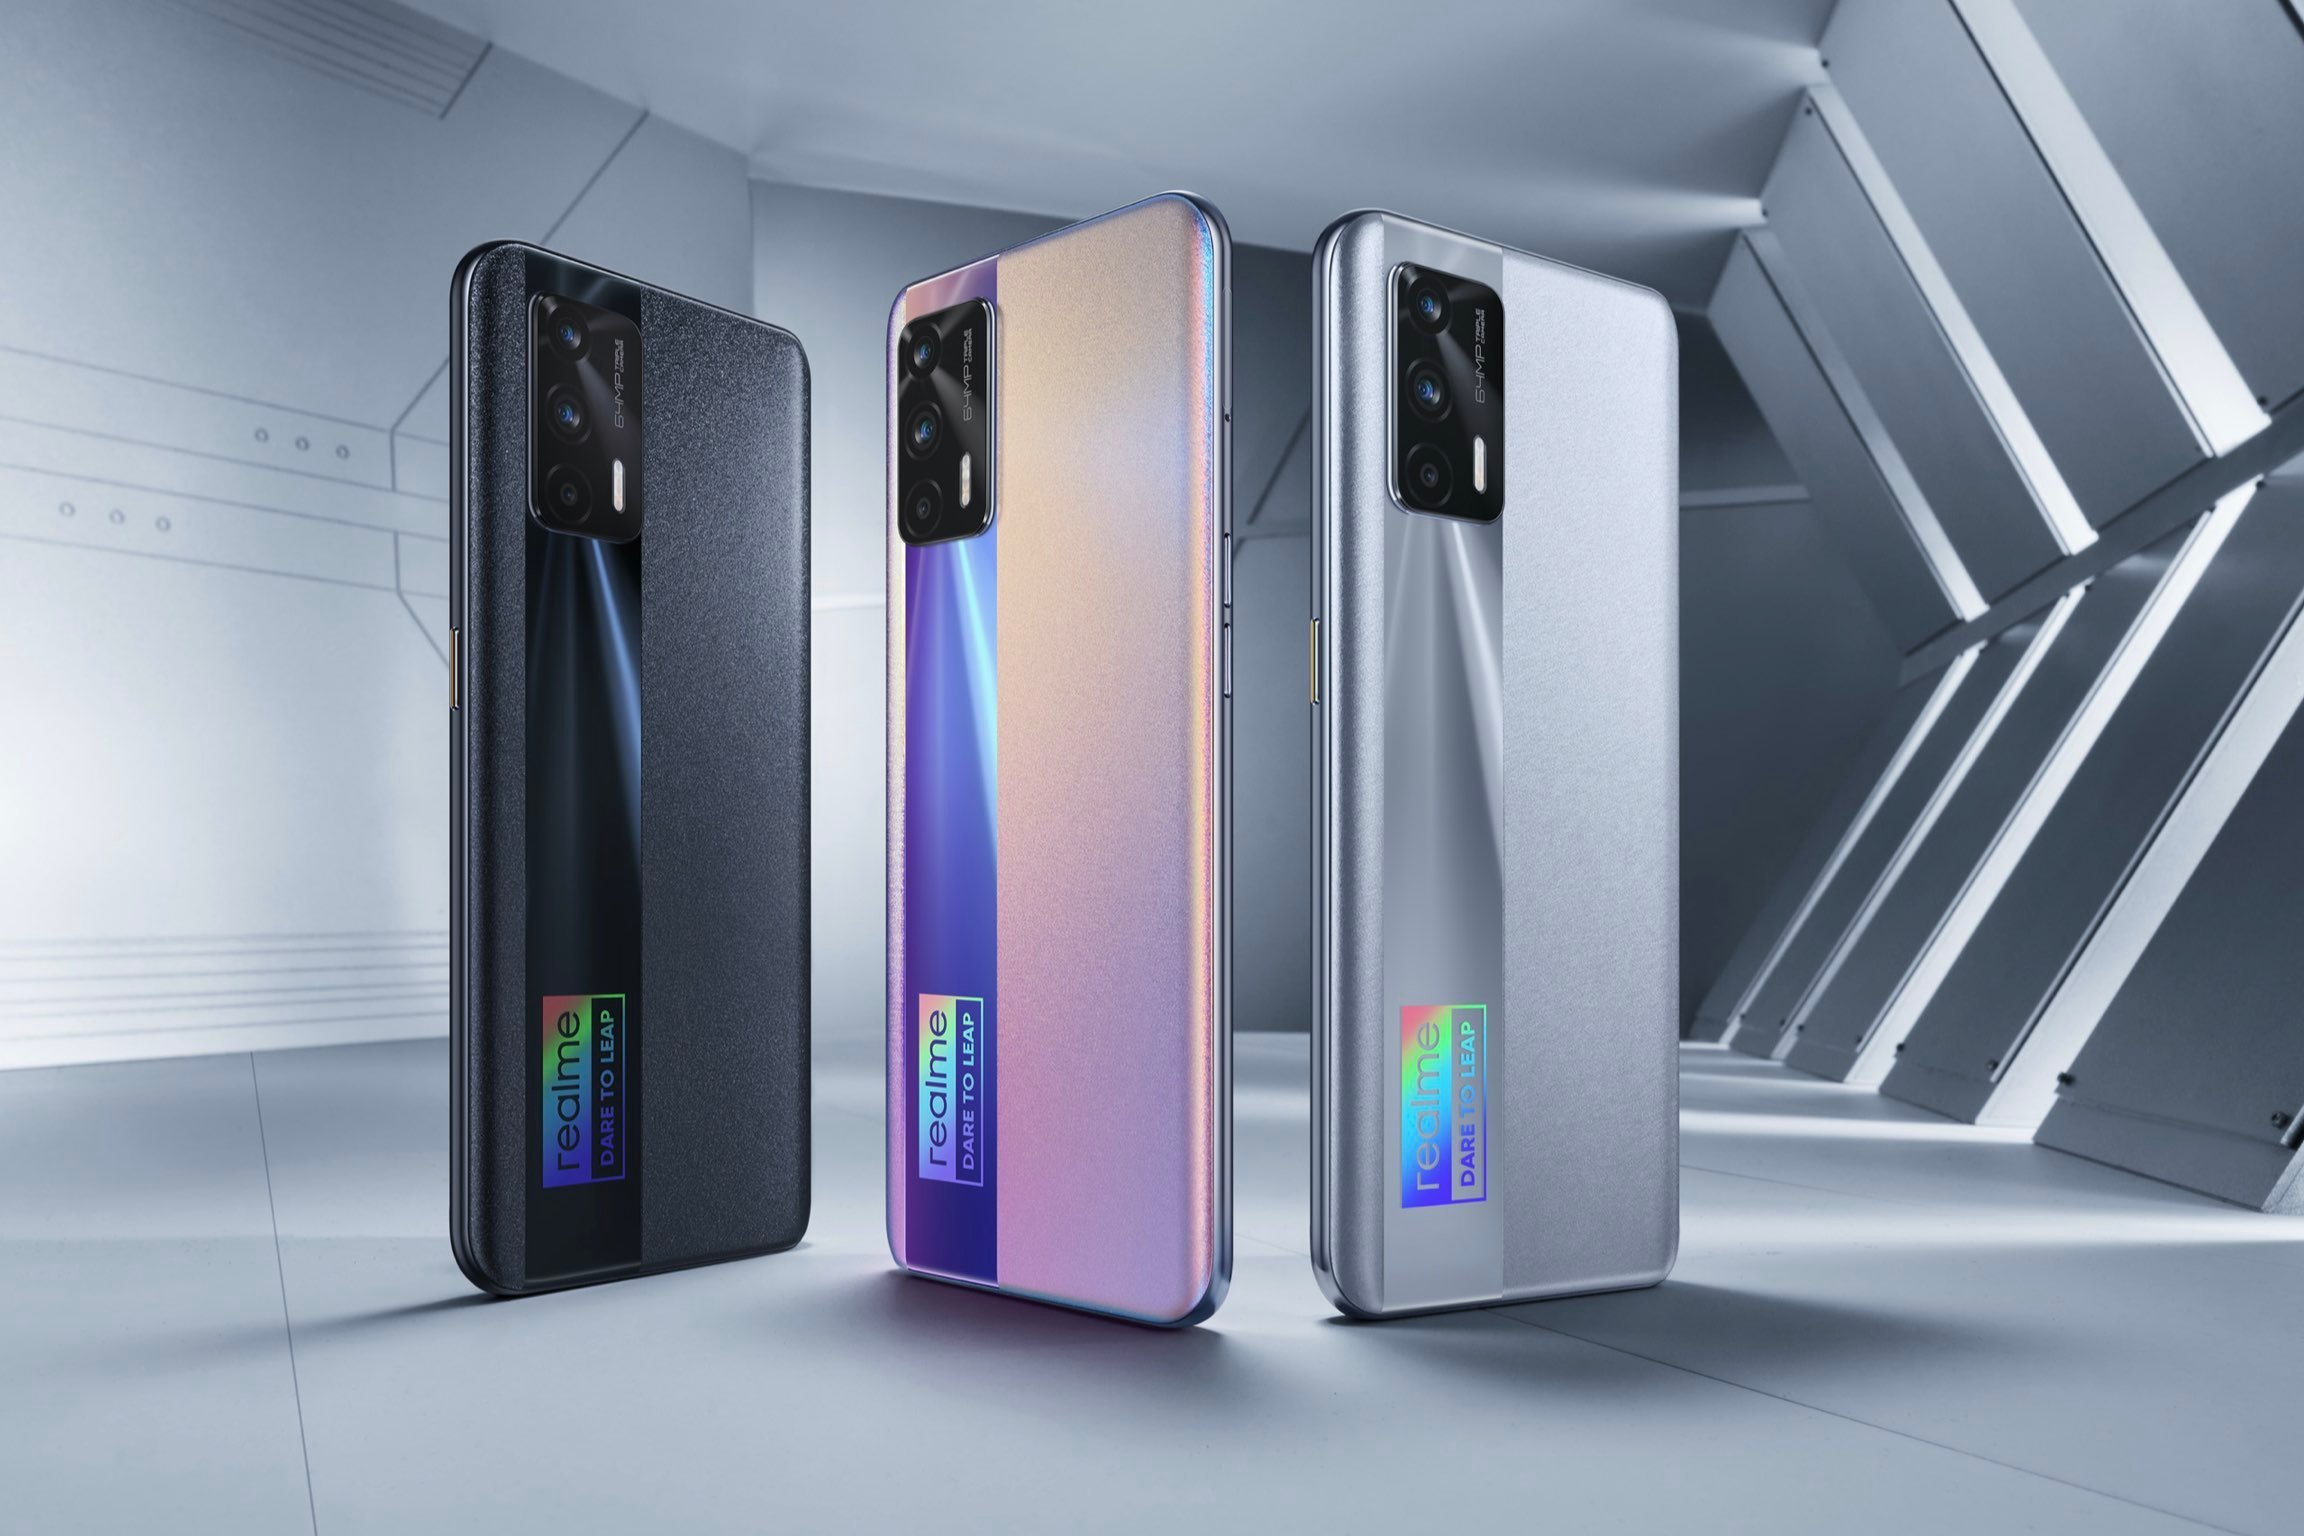 realme GT Neo launched with Dimensity 1200 SoC and 120Hz AMOLED display for $274